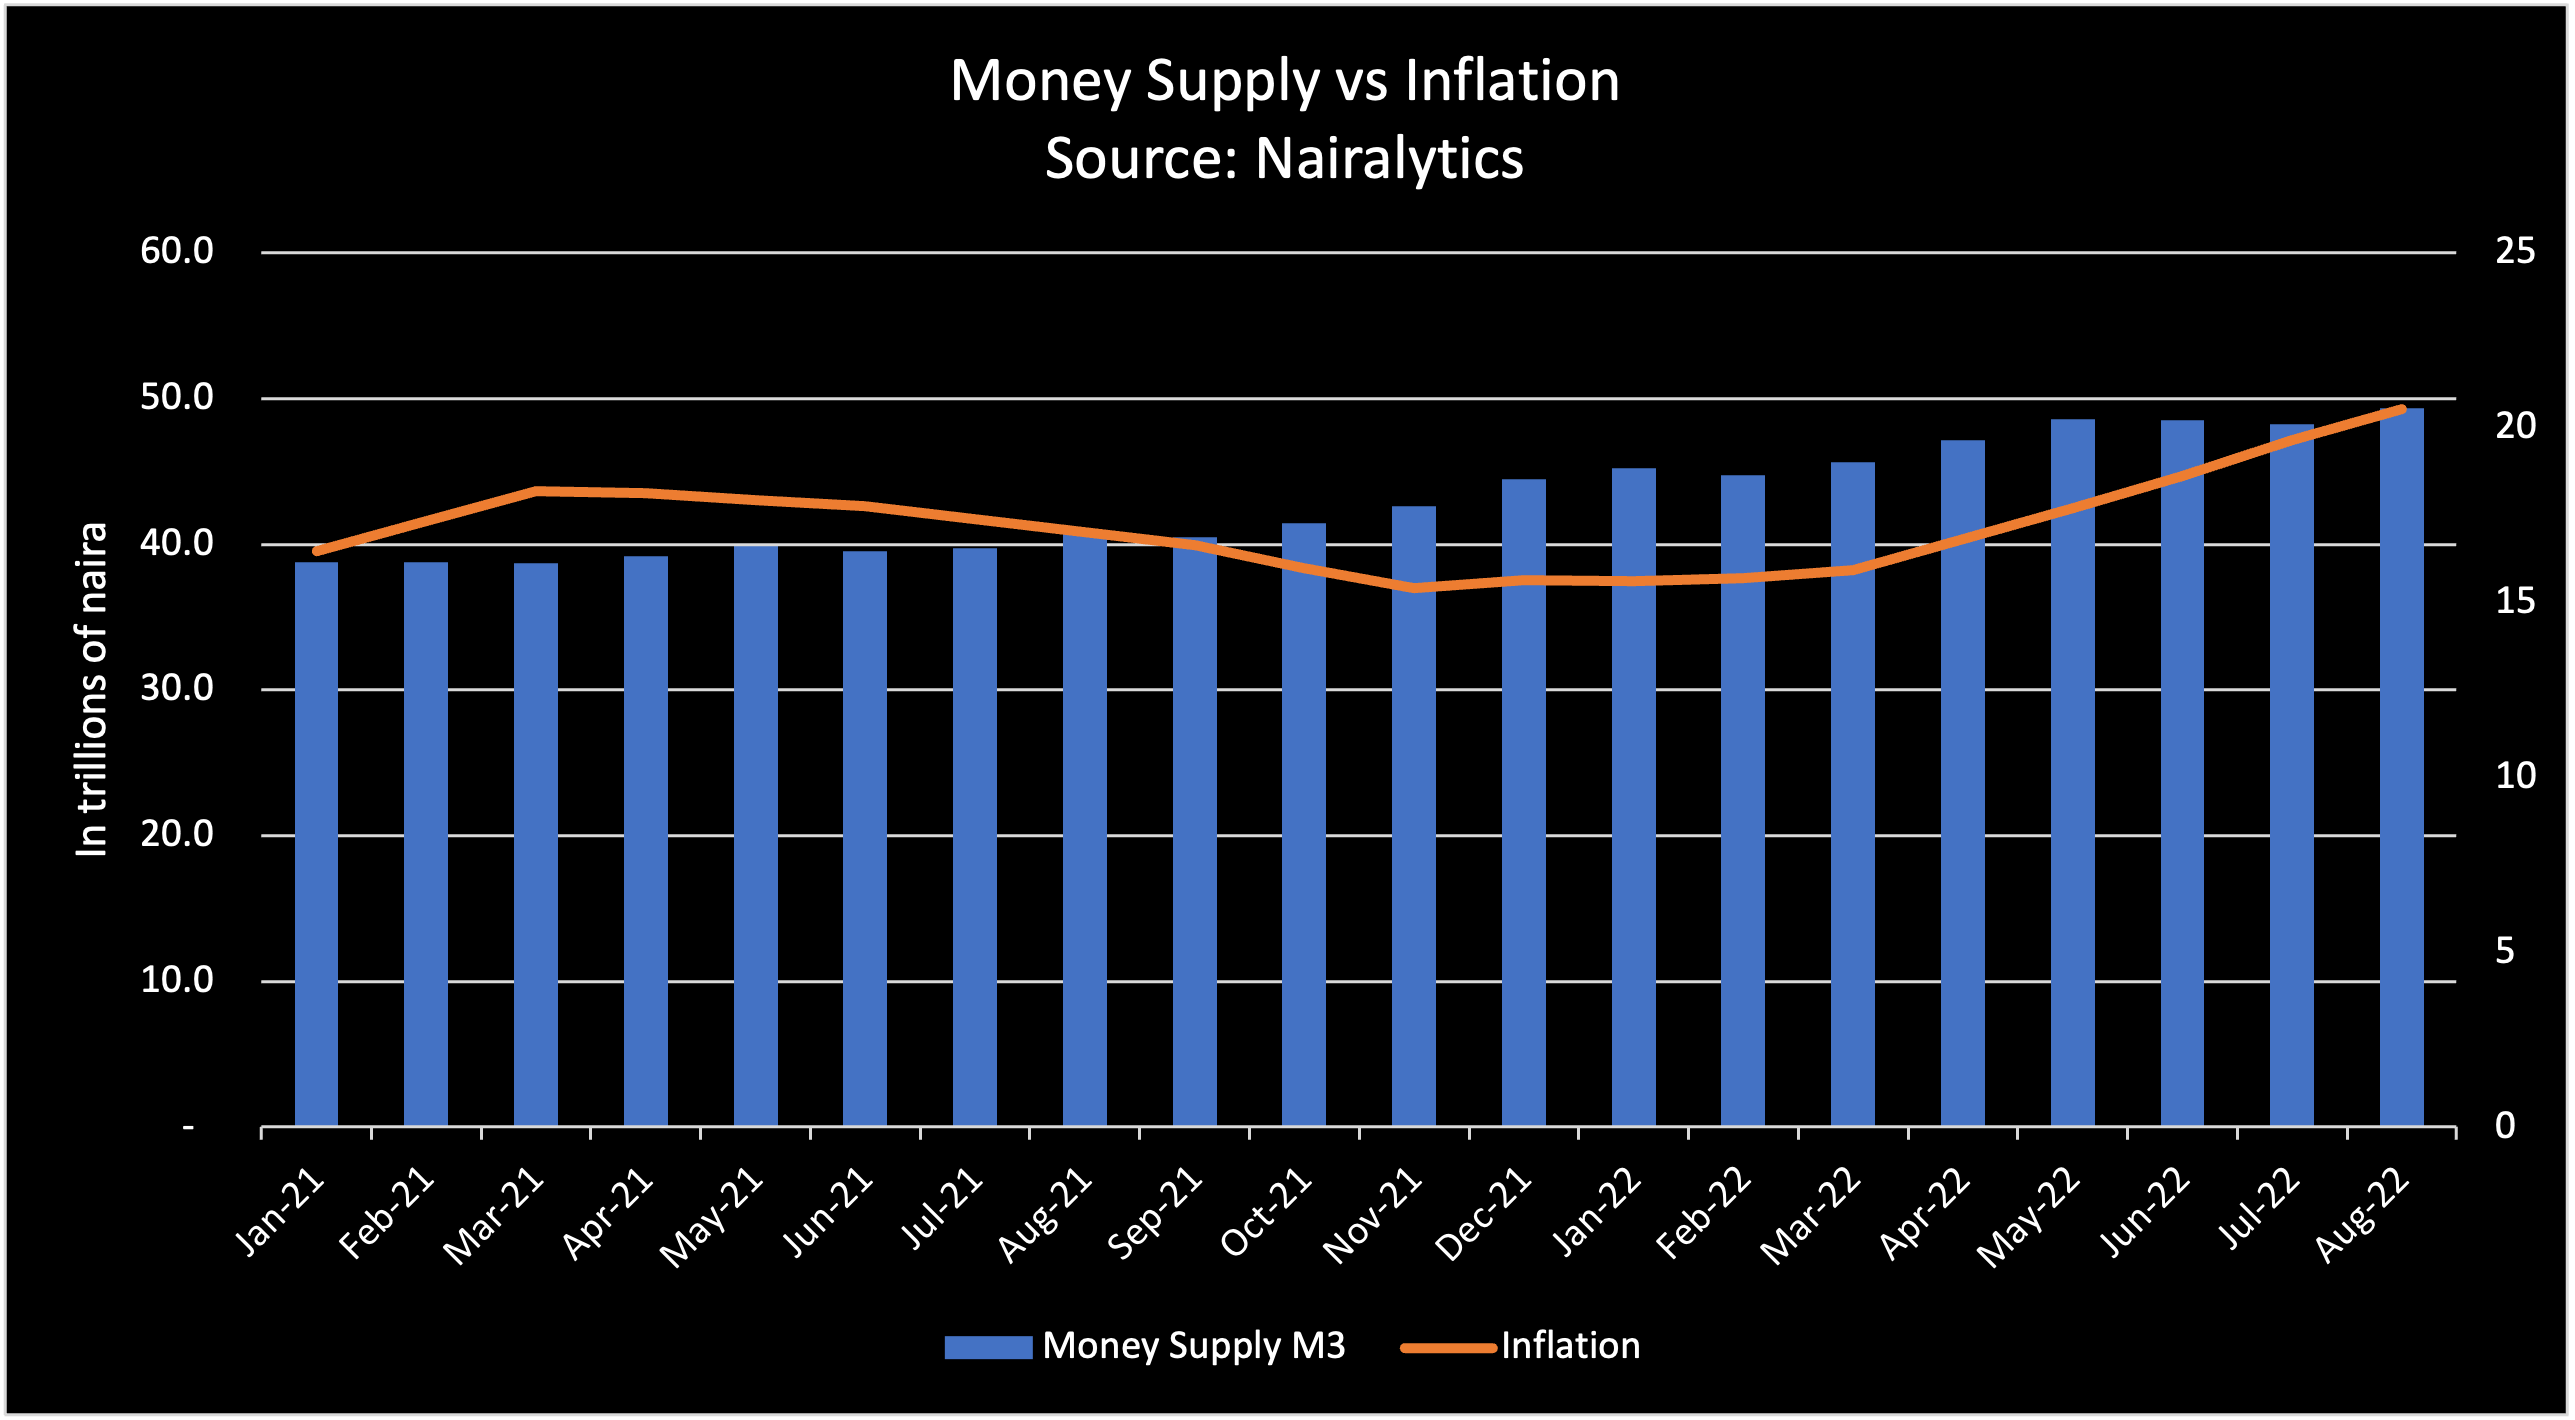 Despite CBN interest rate hikes, money supply jumps to record high of N49 trillion